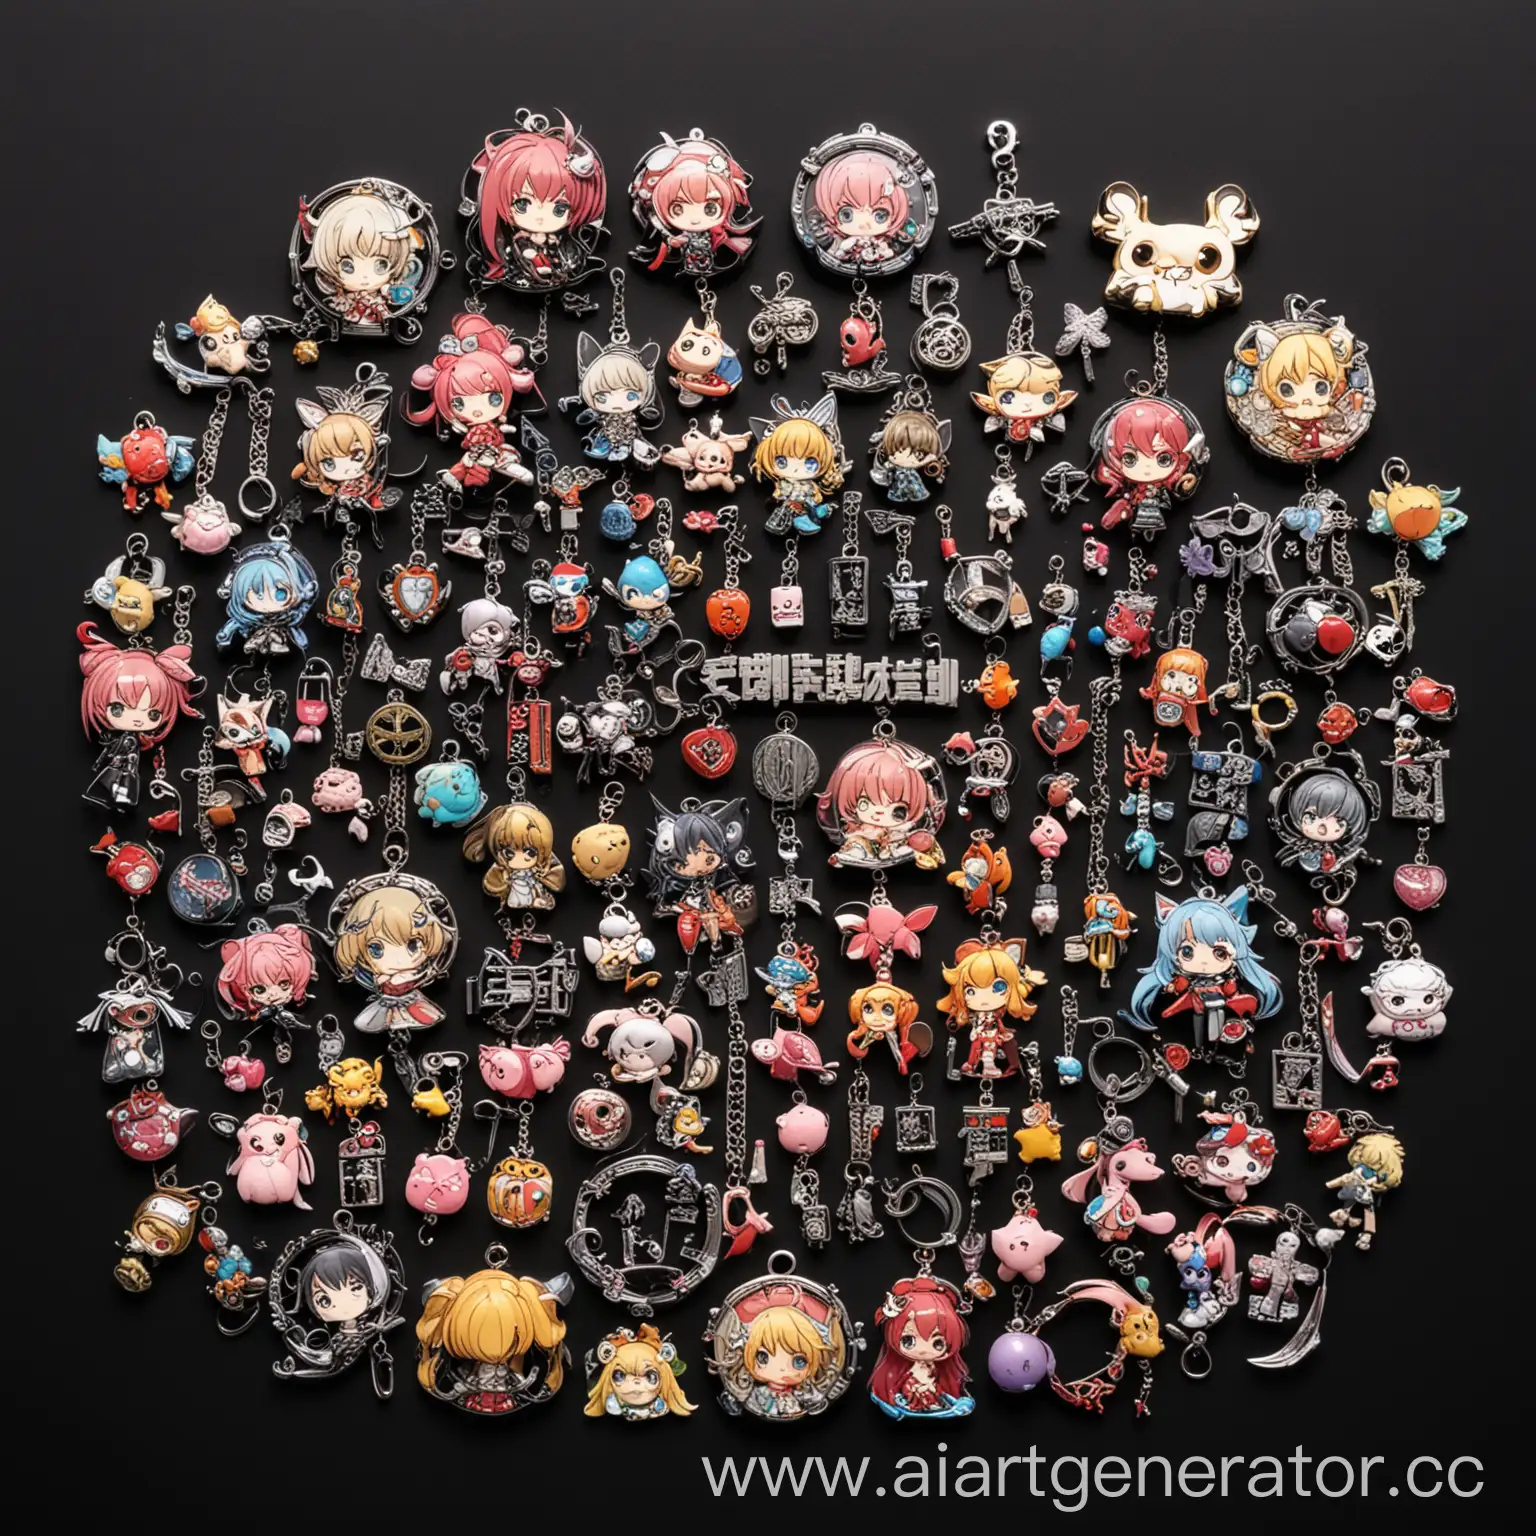 Anime-Accessories-and-Charms-Displayed-on-Elegant-Black-Background